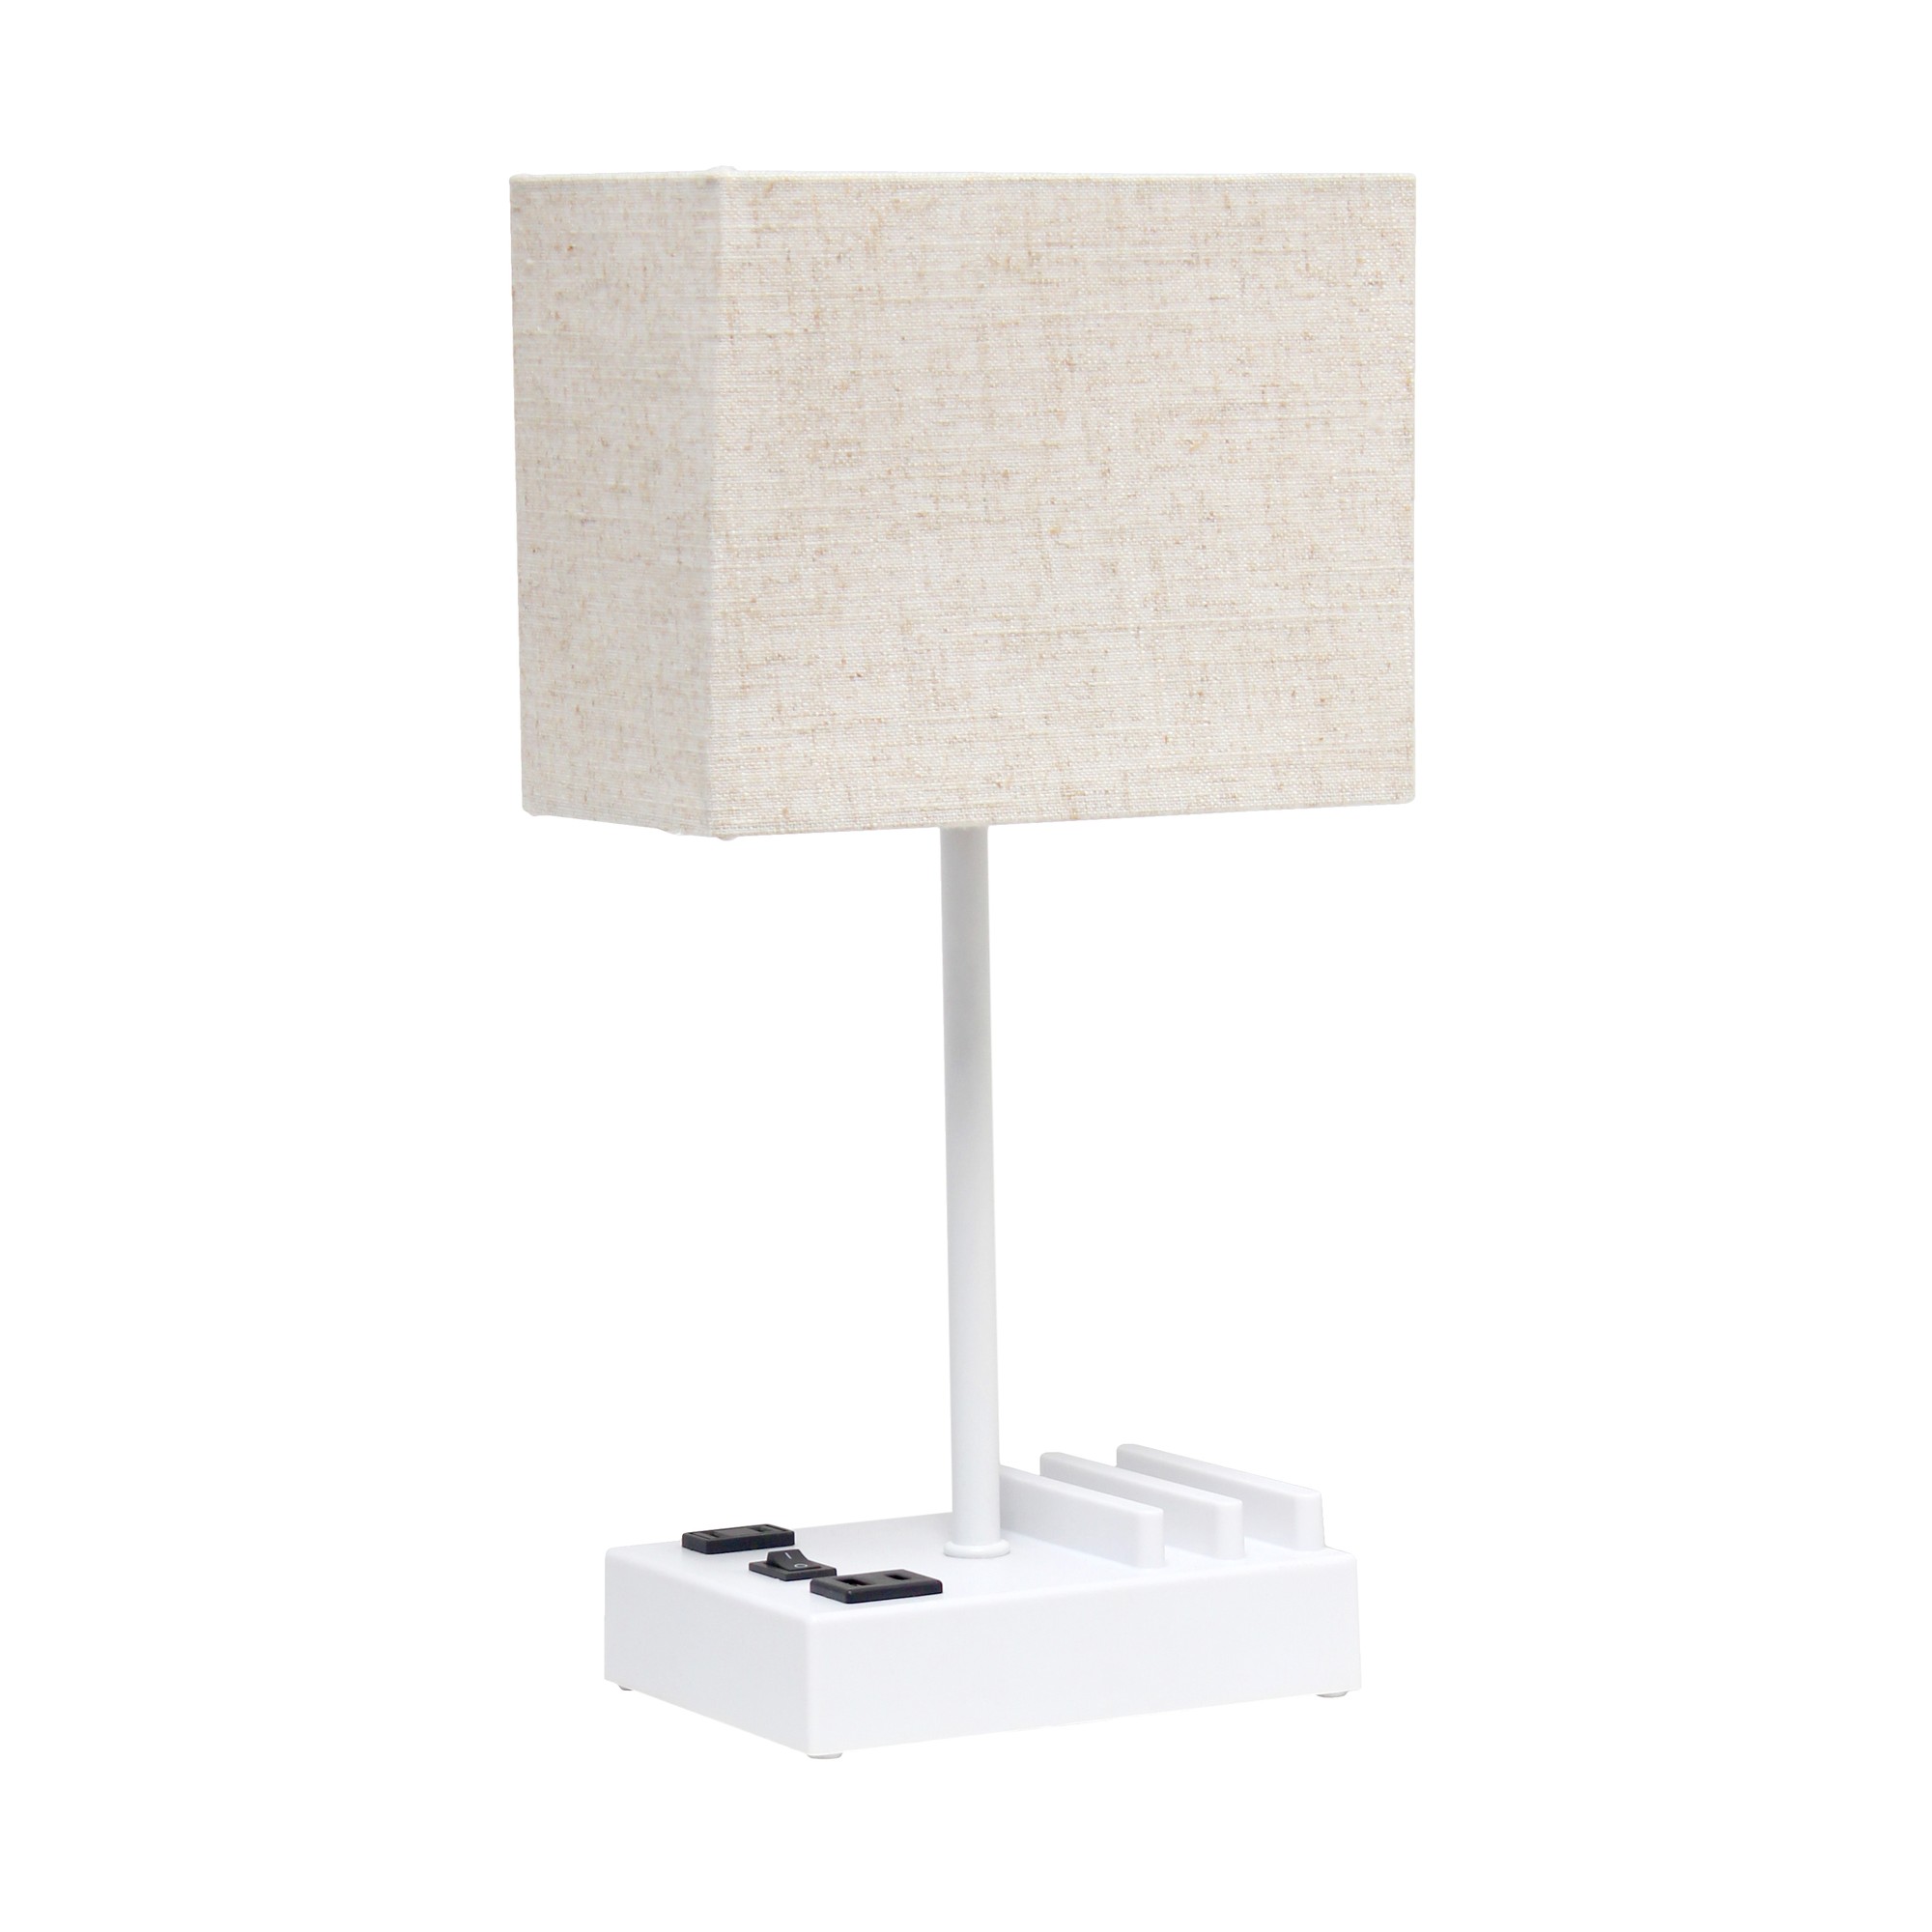 15.3" Table Lamp 2 USB Ports, Charging Outlet, Wht